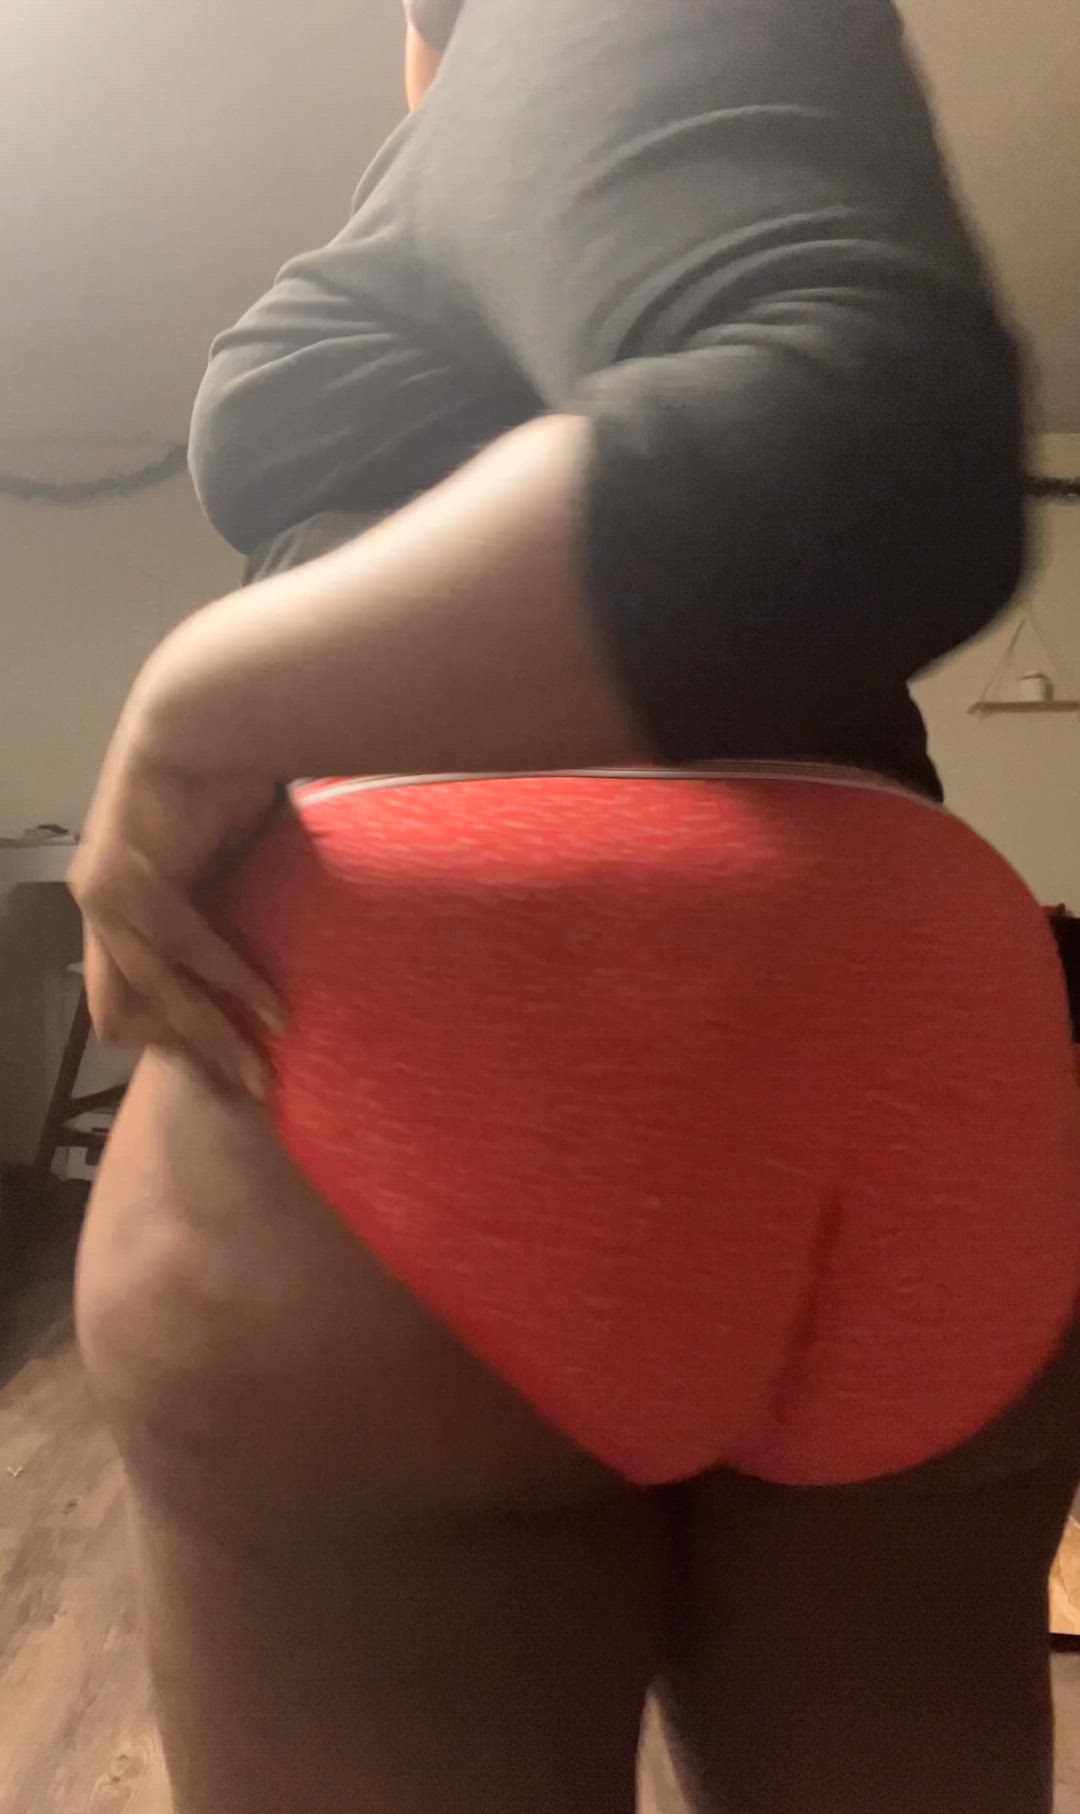 Ass porn video with onlyfans model berrilove <strong>@berrilove</strong>